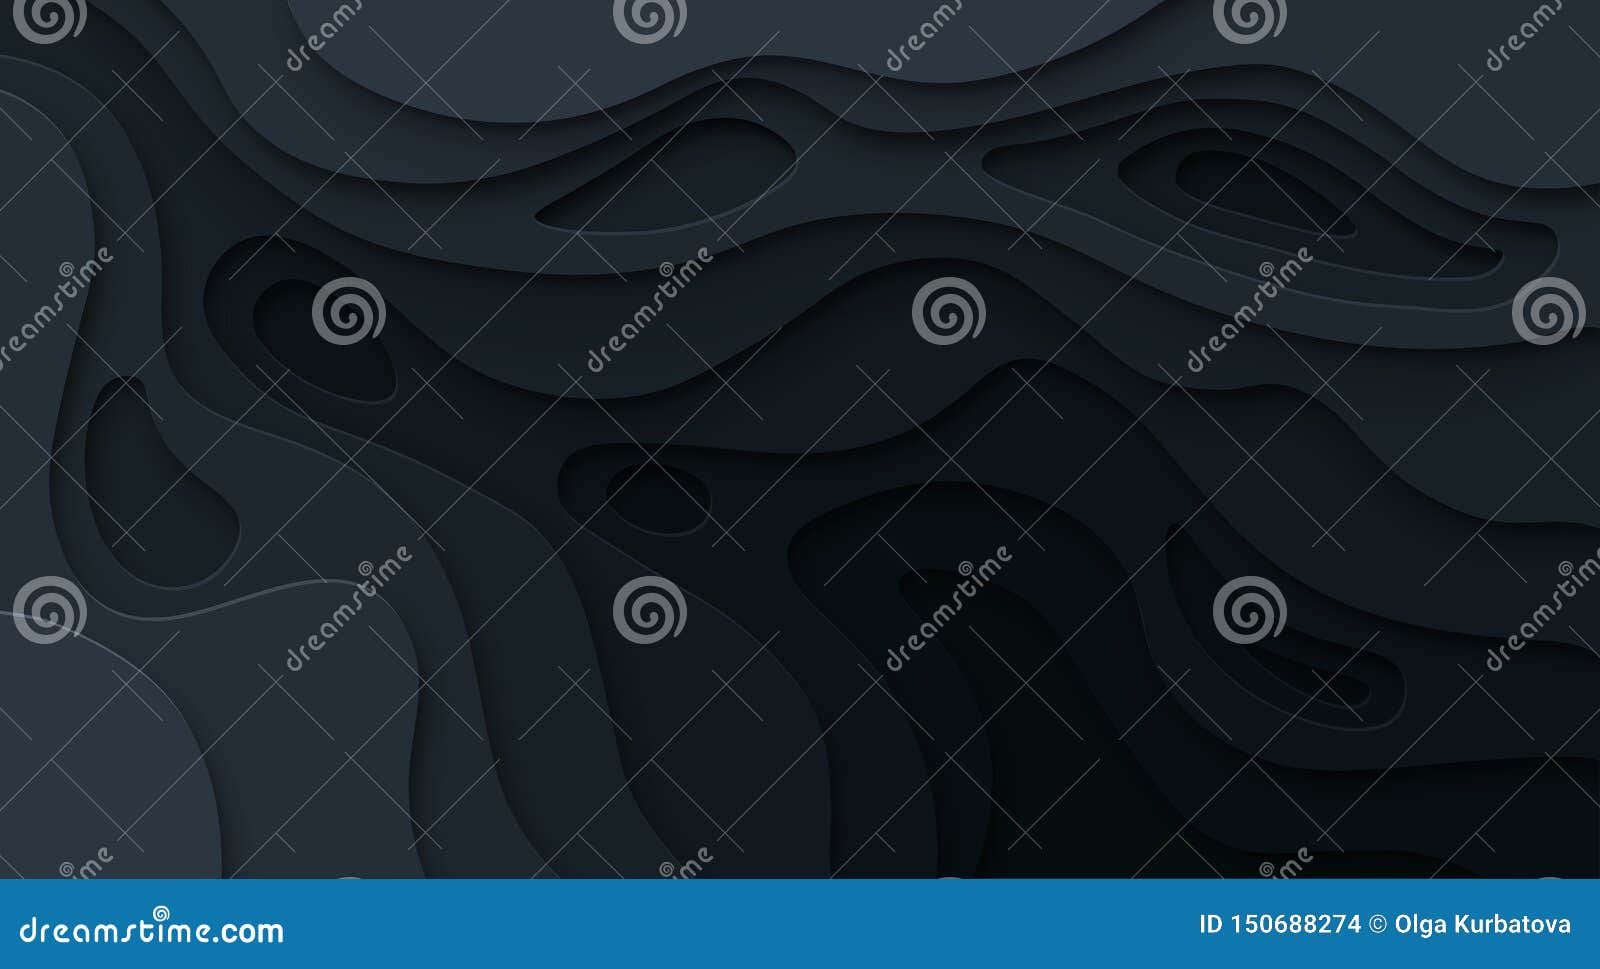 abstract paper cut black background. topographic map dark relief texture with curved levels, hole and shadow. 